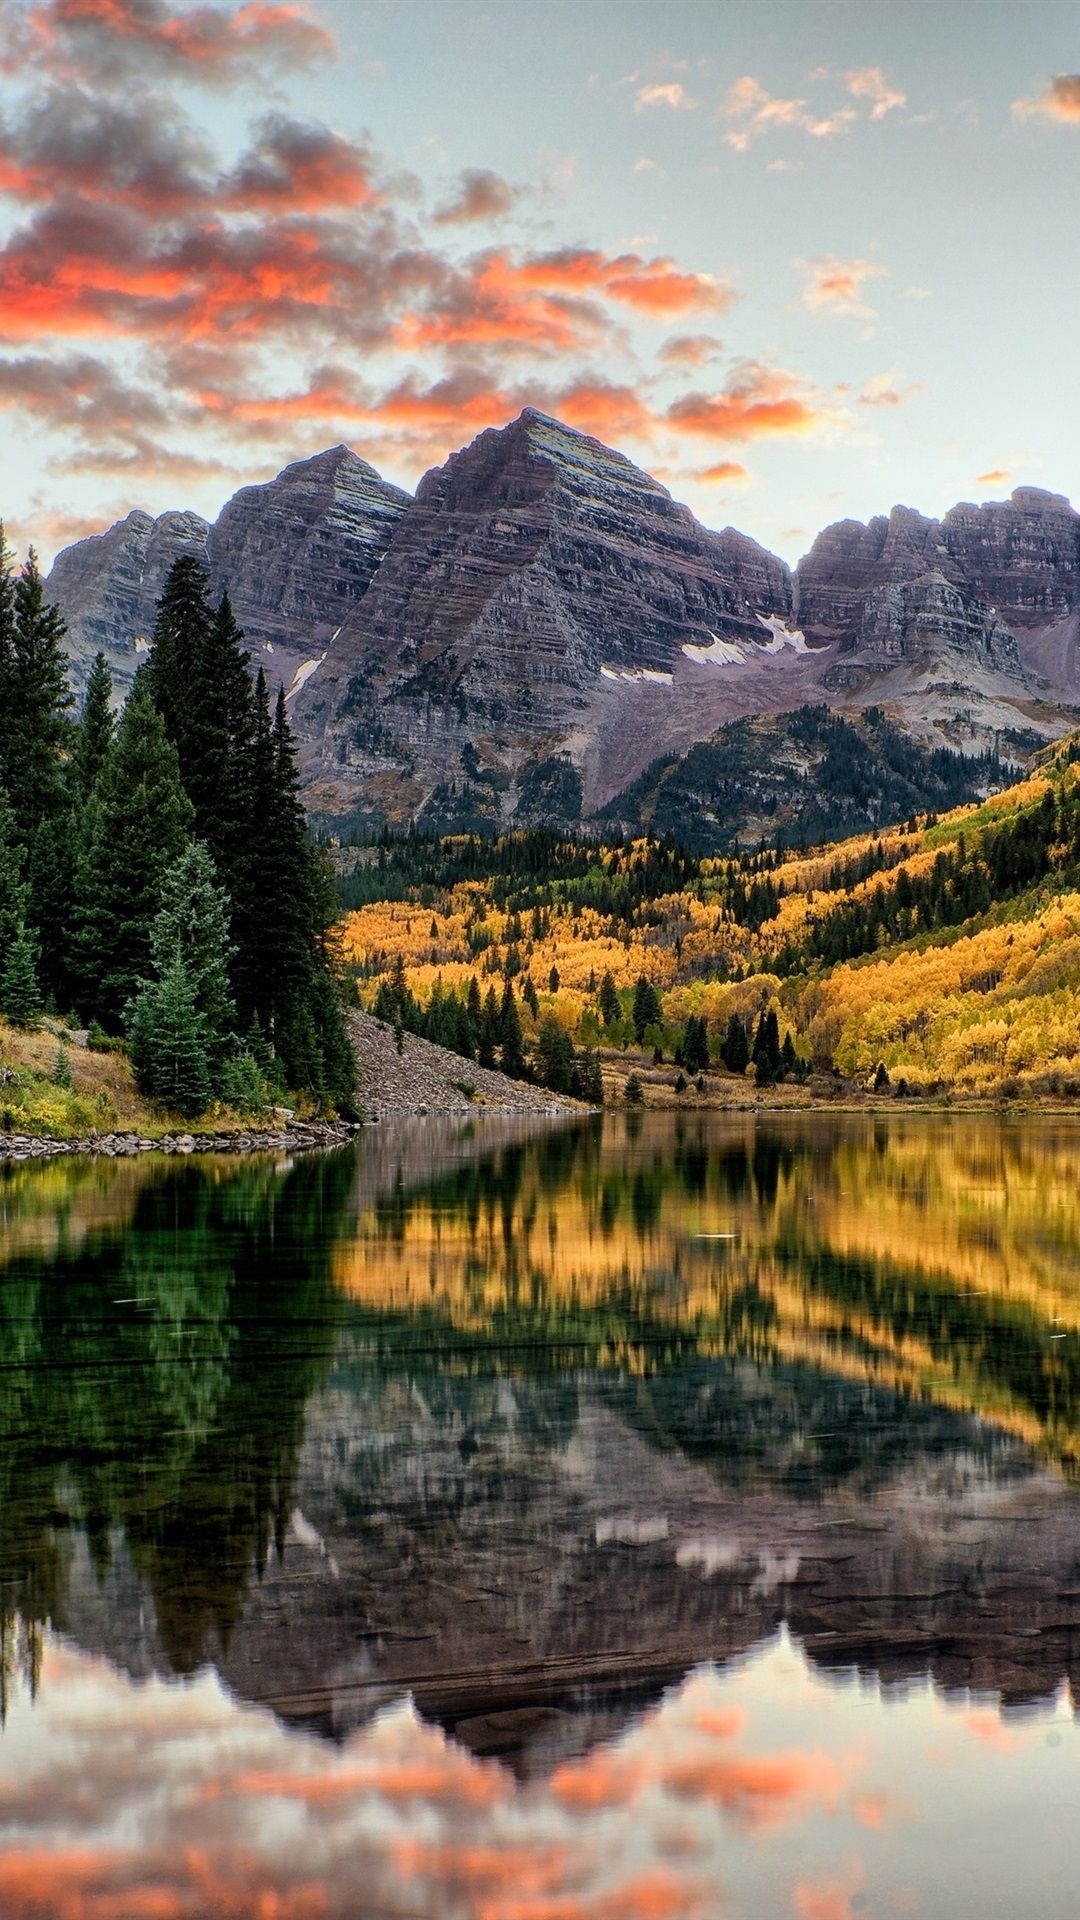 Colorado iPhone wallpapers, High-quality backgrounds, Scenic landscapes, Breathtaking views, 1080x1920 Full HD Phone